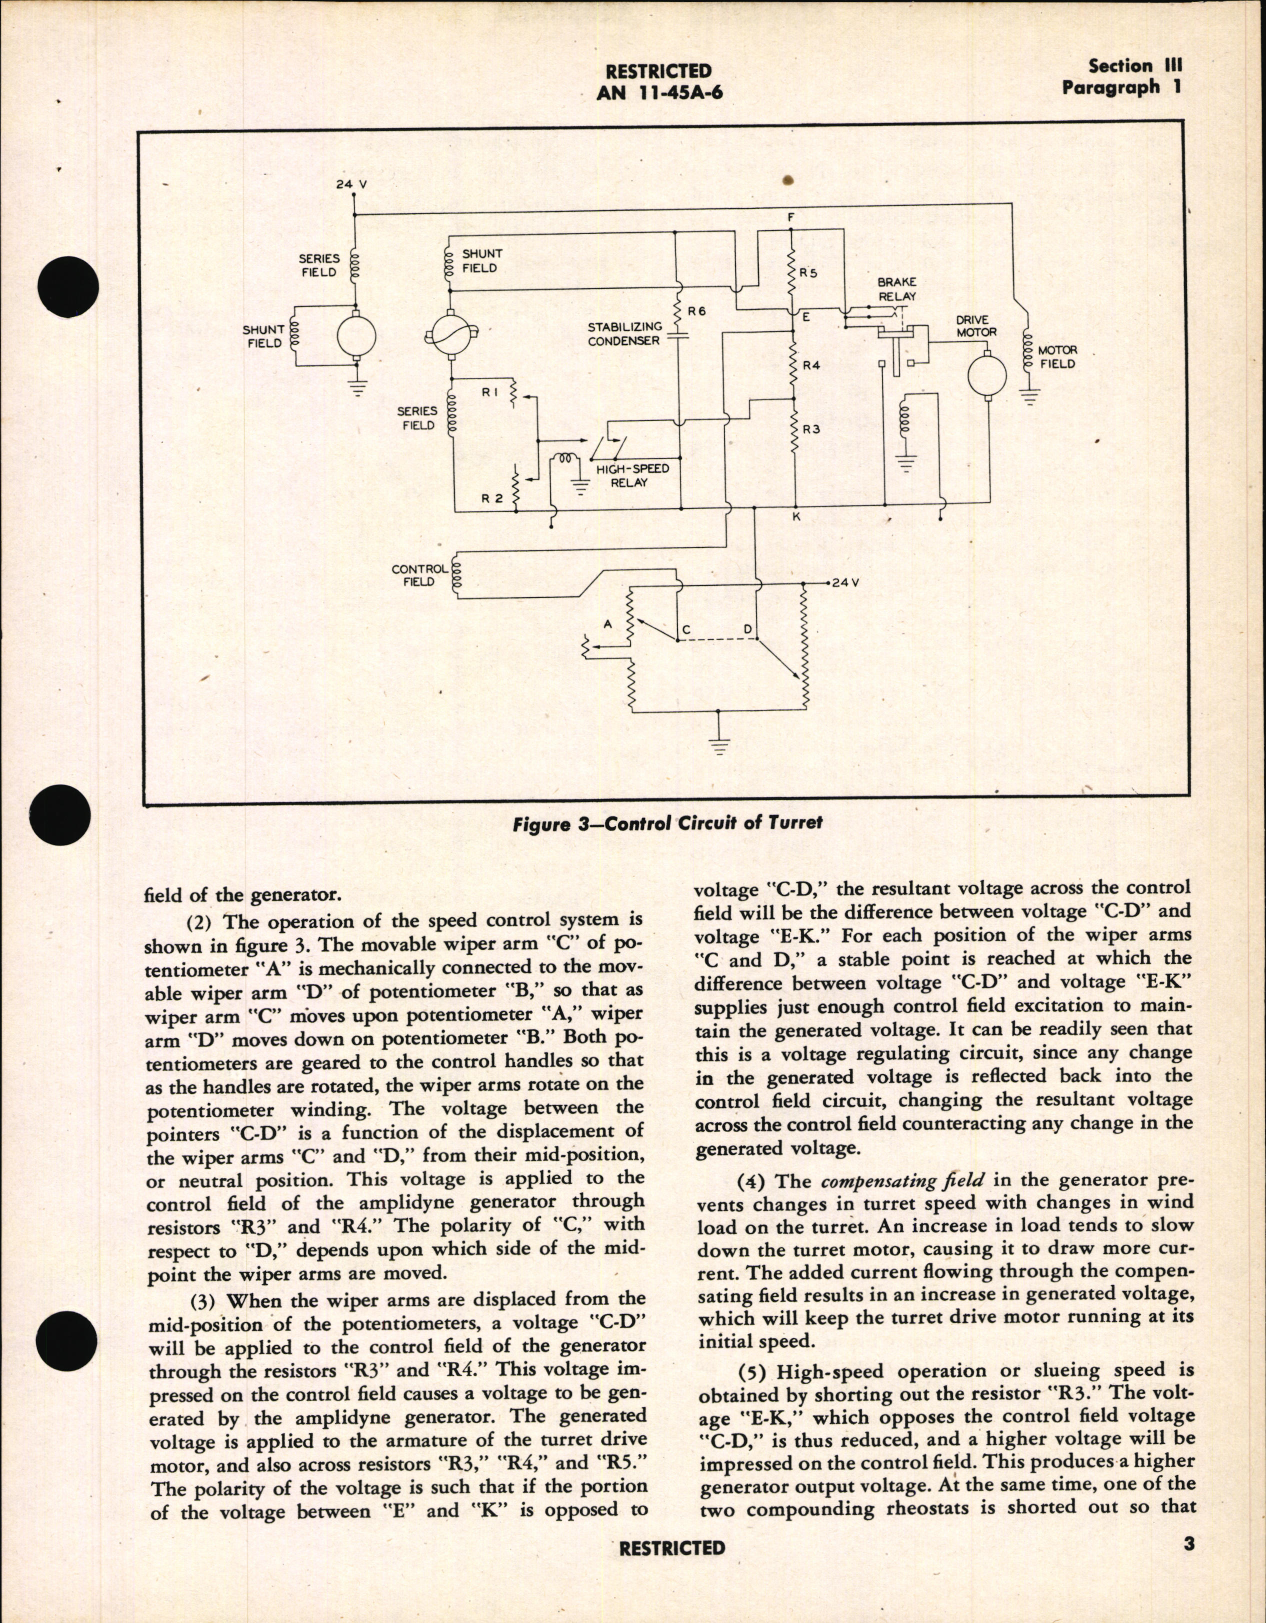 Sample page 7 from AirCorps Library document: Overhaul Instructions for Upper Turret Type A-9A, Navy Model 250CE-3